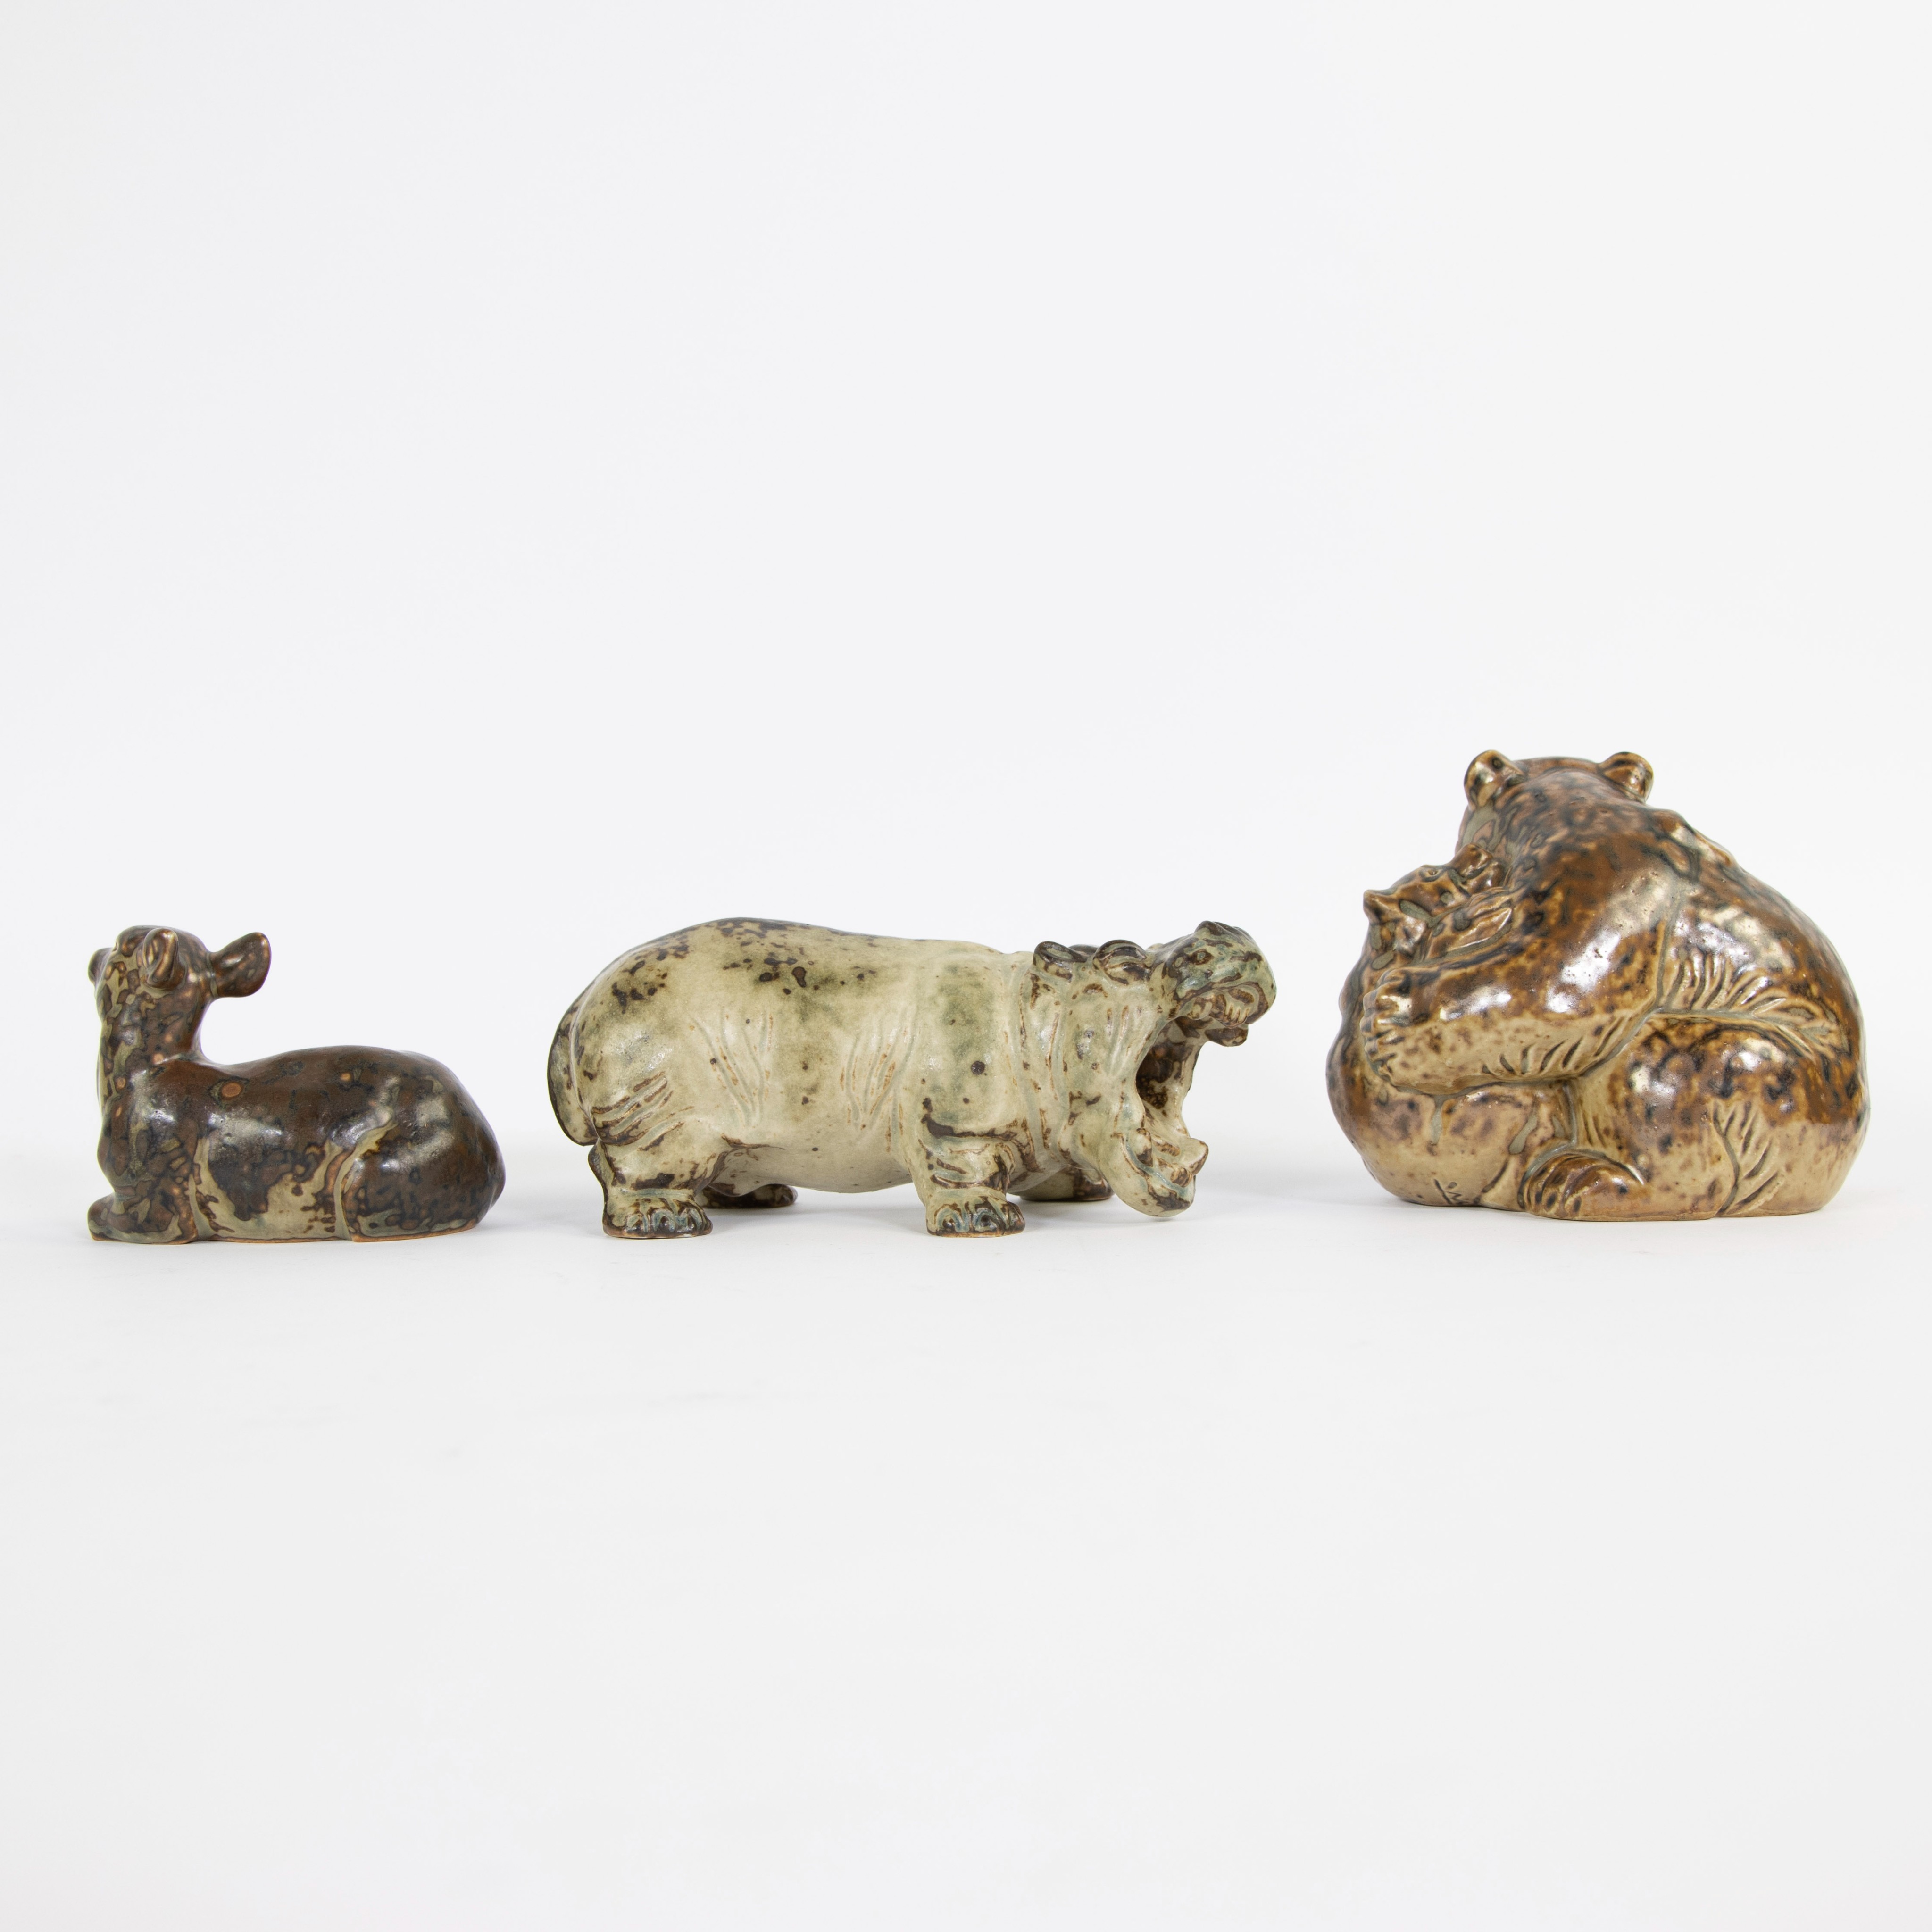 Lot Danish earthenware plate and 3 Royal Copenhagen figurines of animals, marked - Image 4 of 6